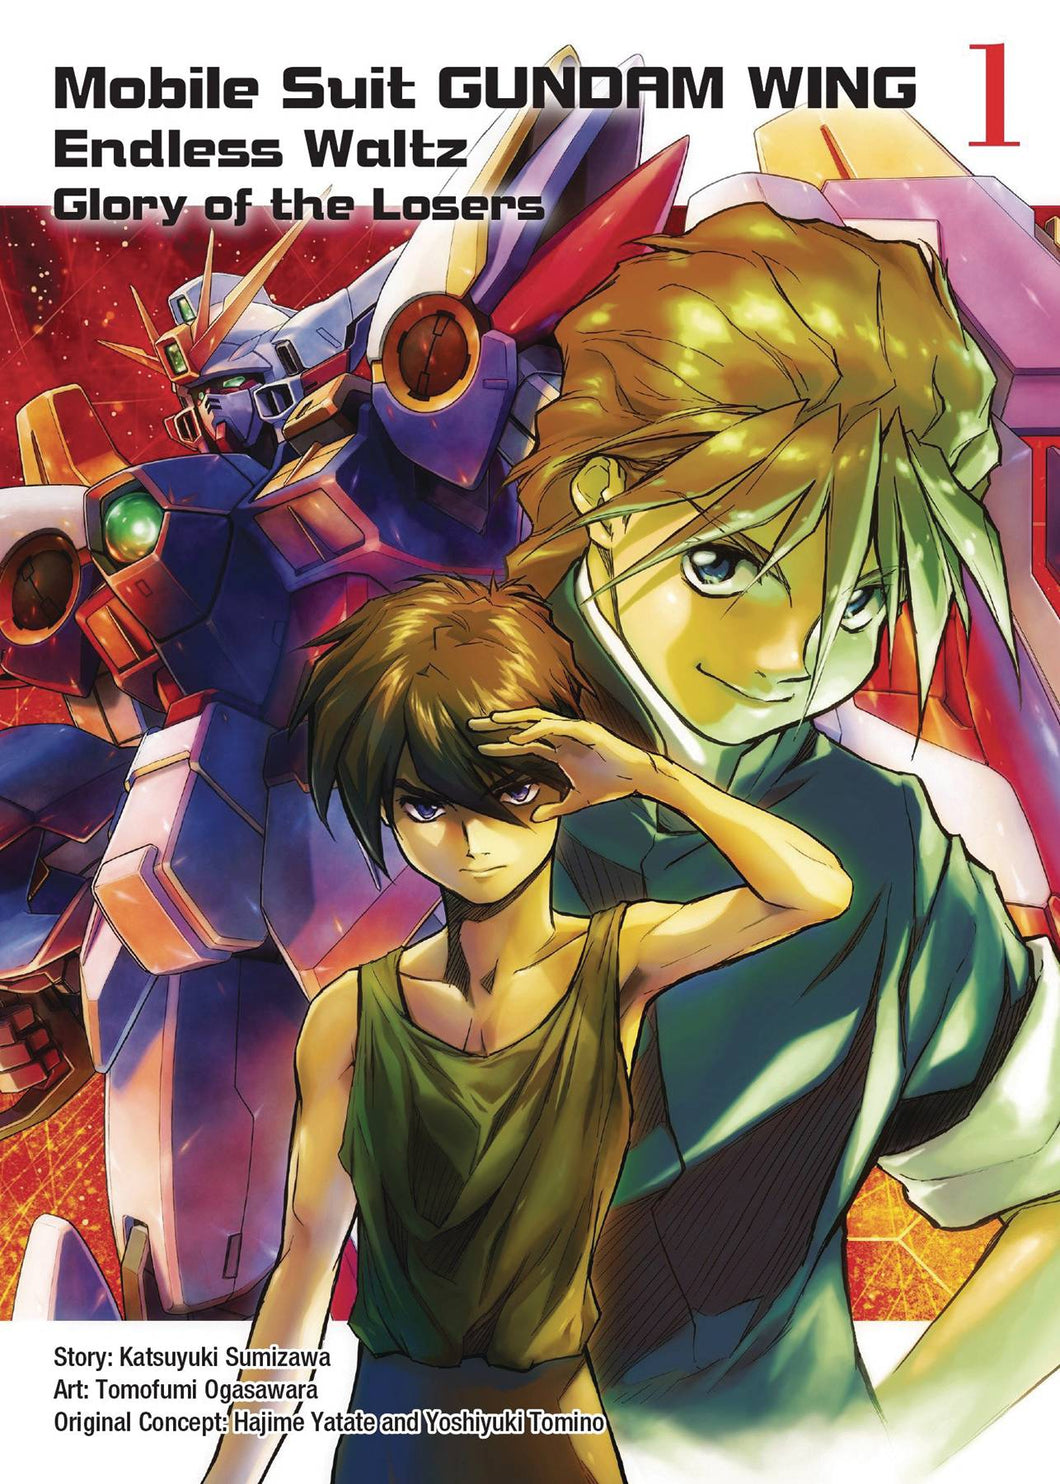 MOBILE SUIT GUNDAM WING GLORY OF THE LOSERS GN VOL 01 (C: 0-